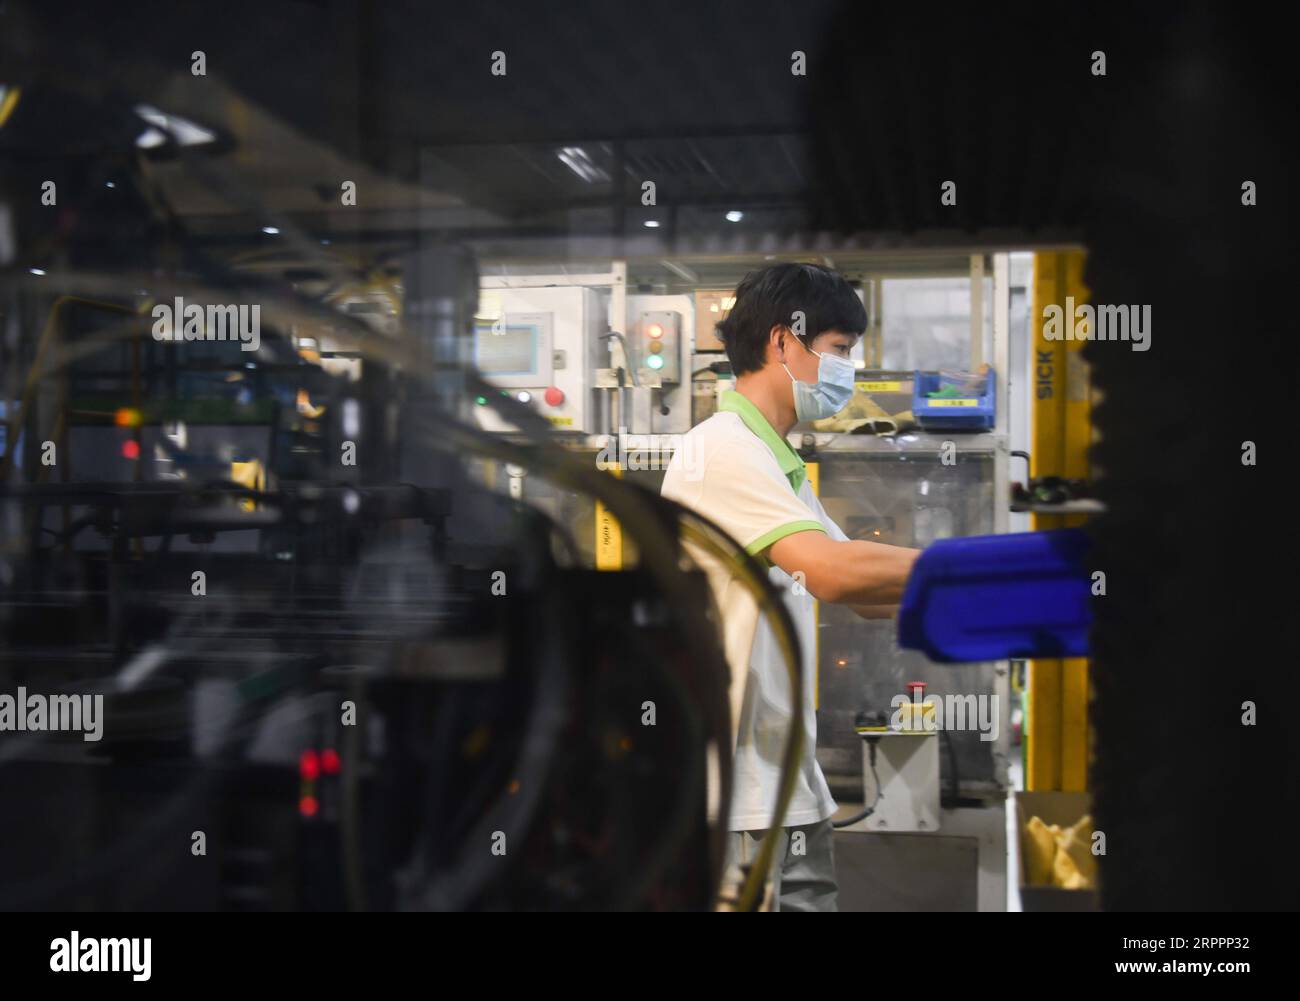 200320 -- WUHAN, March 20, 2020 -- A staff member works on a production line at a company in Jingzhou, central China s Hubei Province, March 19, 2020. The Valeo Hubei company has resumed production since late February. Over 90% capacity of the company has recovered and over 80% staff members have returned to their work.  CHINA-HUBEI-JINGZHOU-PRODUCTION RESUMPTION CN ChengxMin PUBLICATIONxNOTxINxCHN Stock Photo